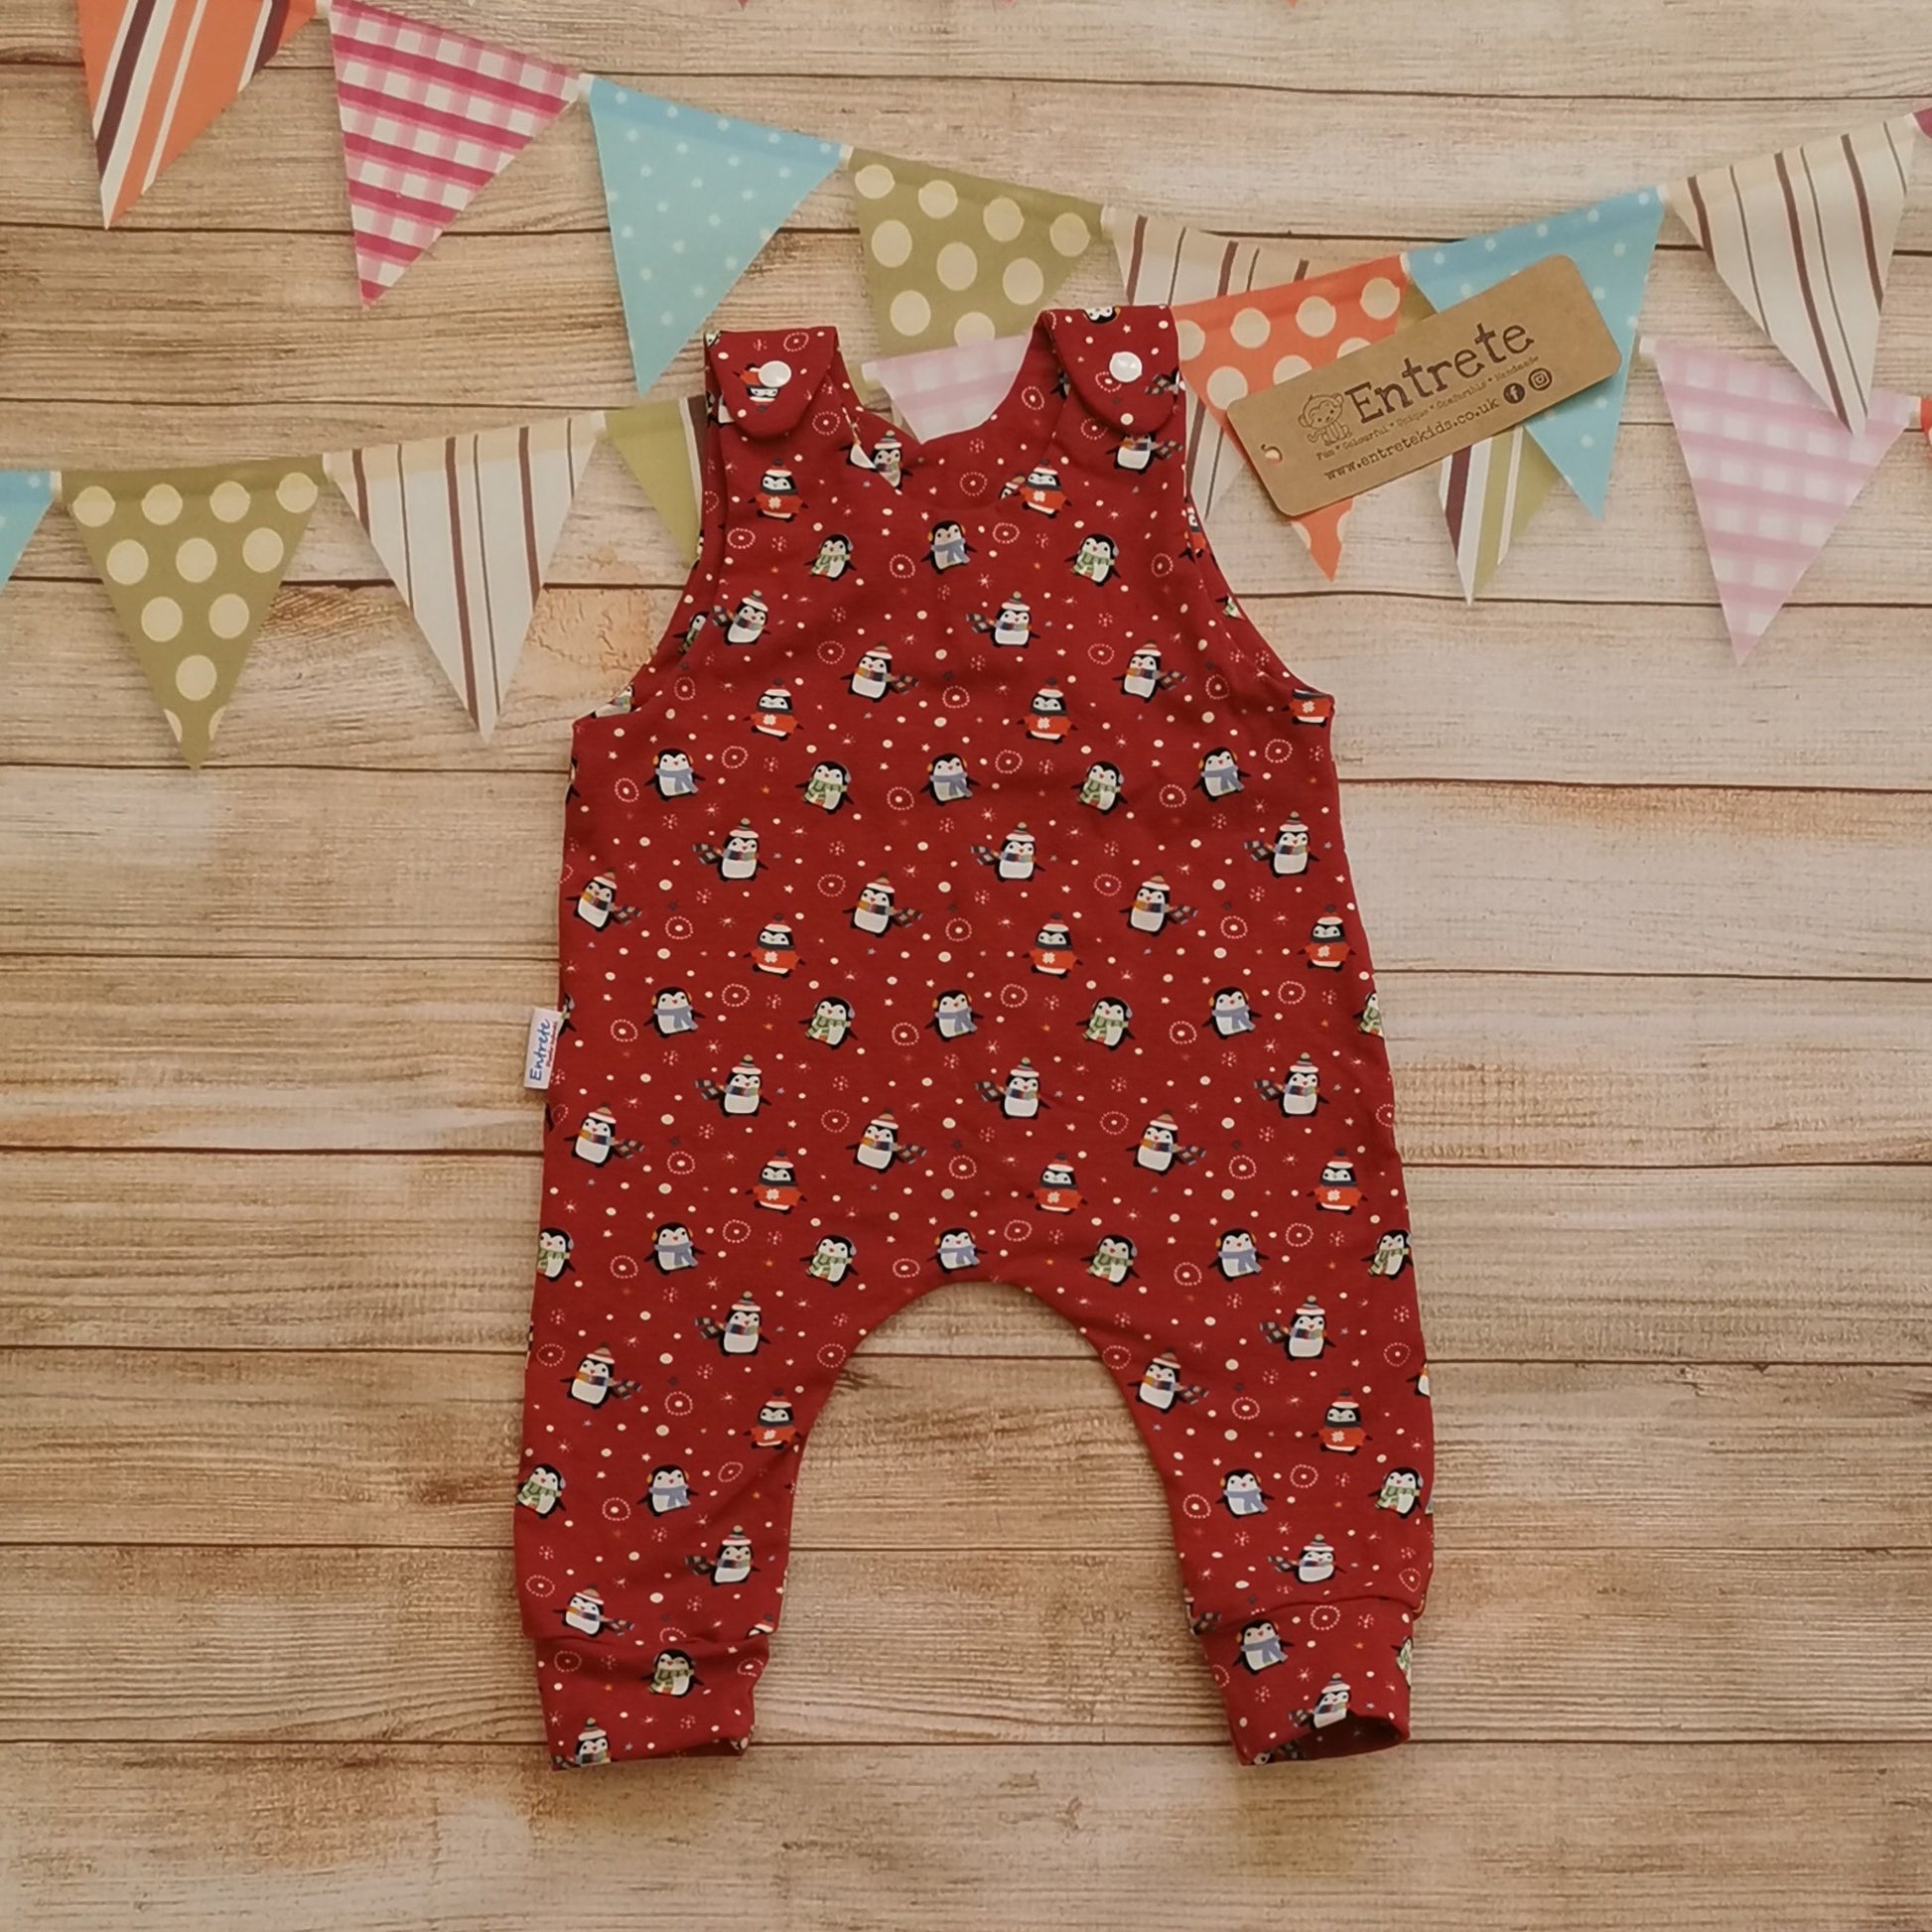 Soft and comfy sleeveless romper, handmade using the festive and fun red penguins cotton jersey. Perfect for Christmas!